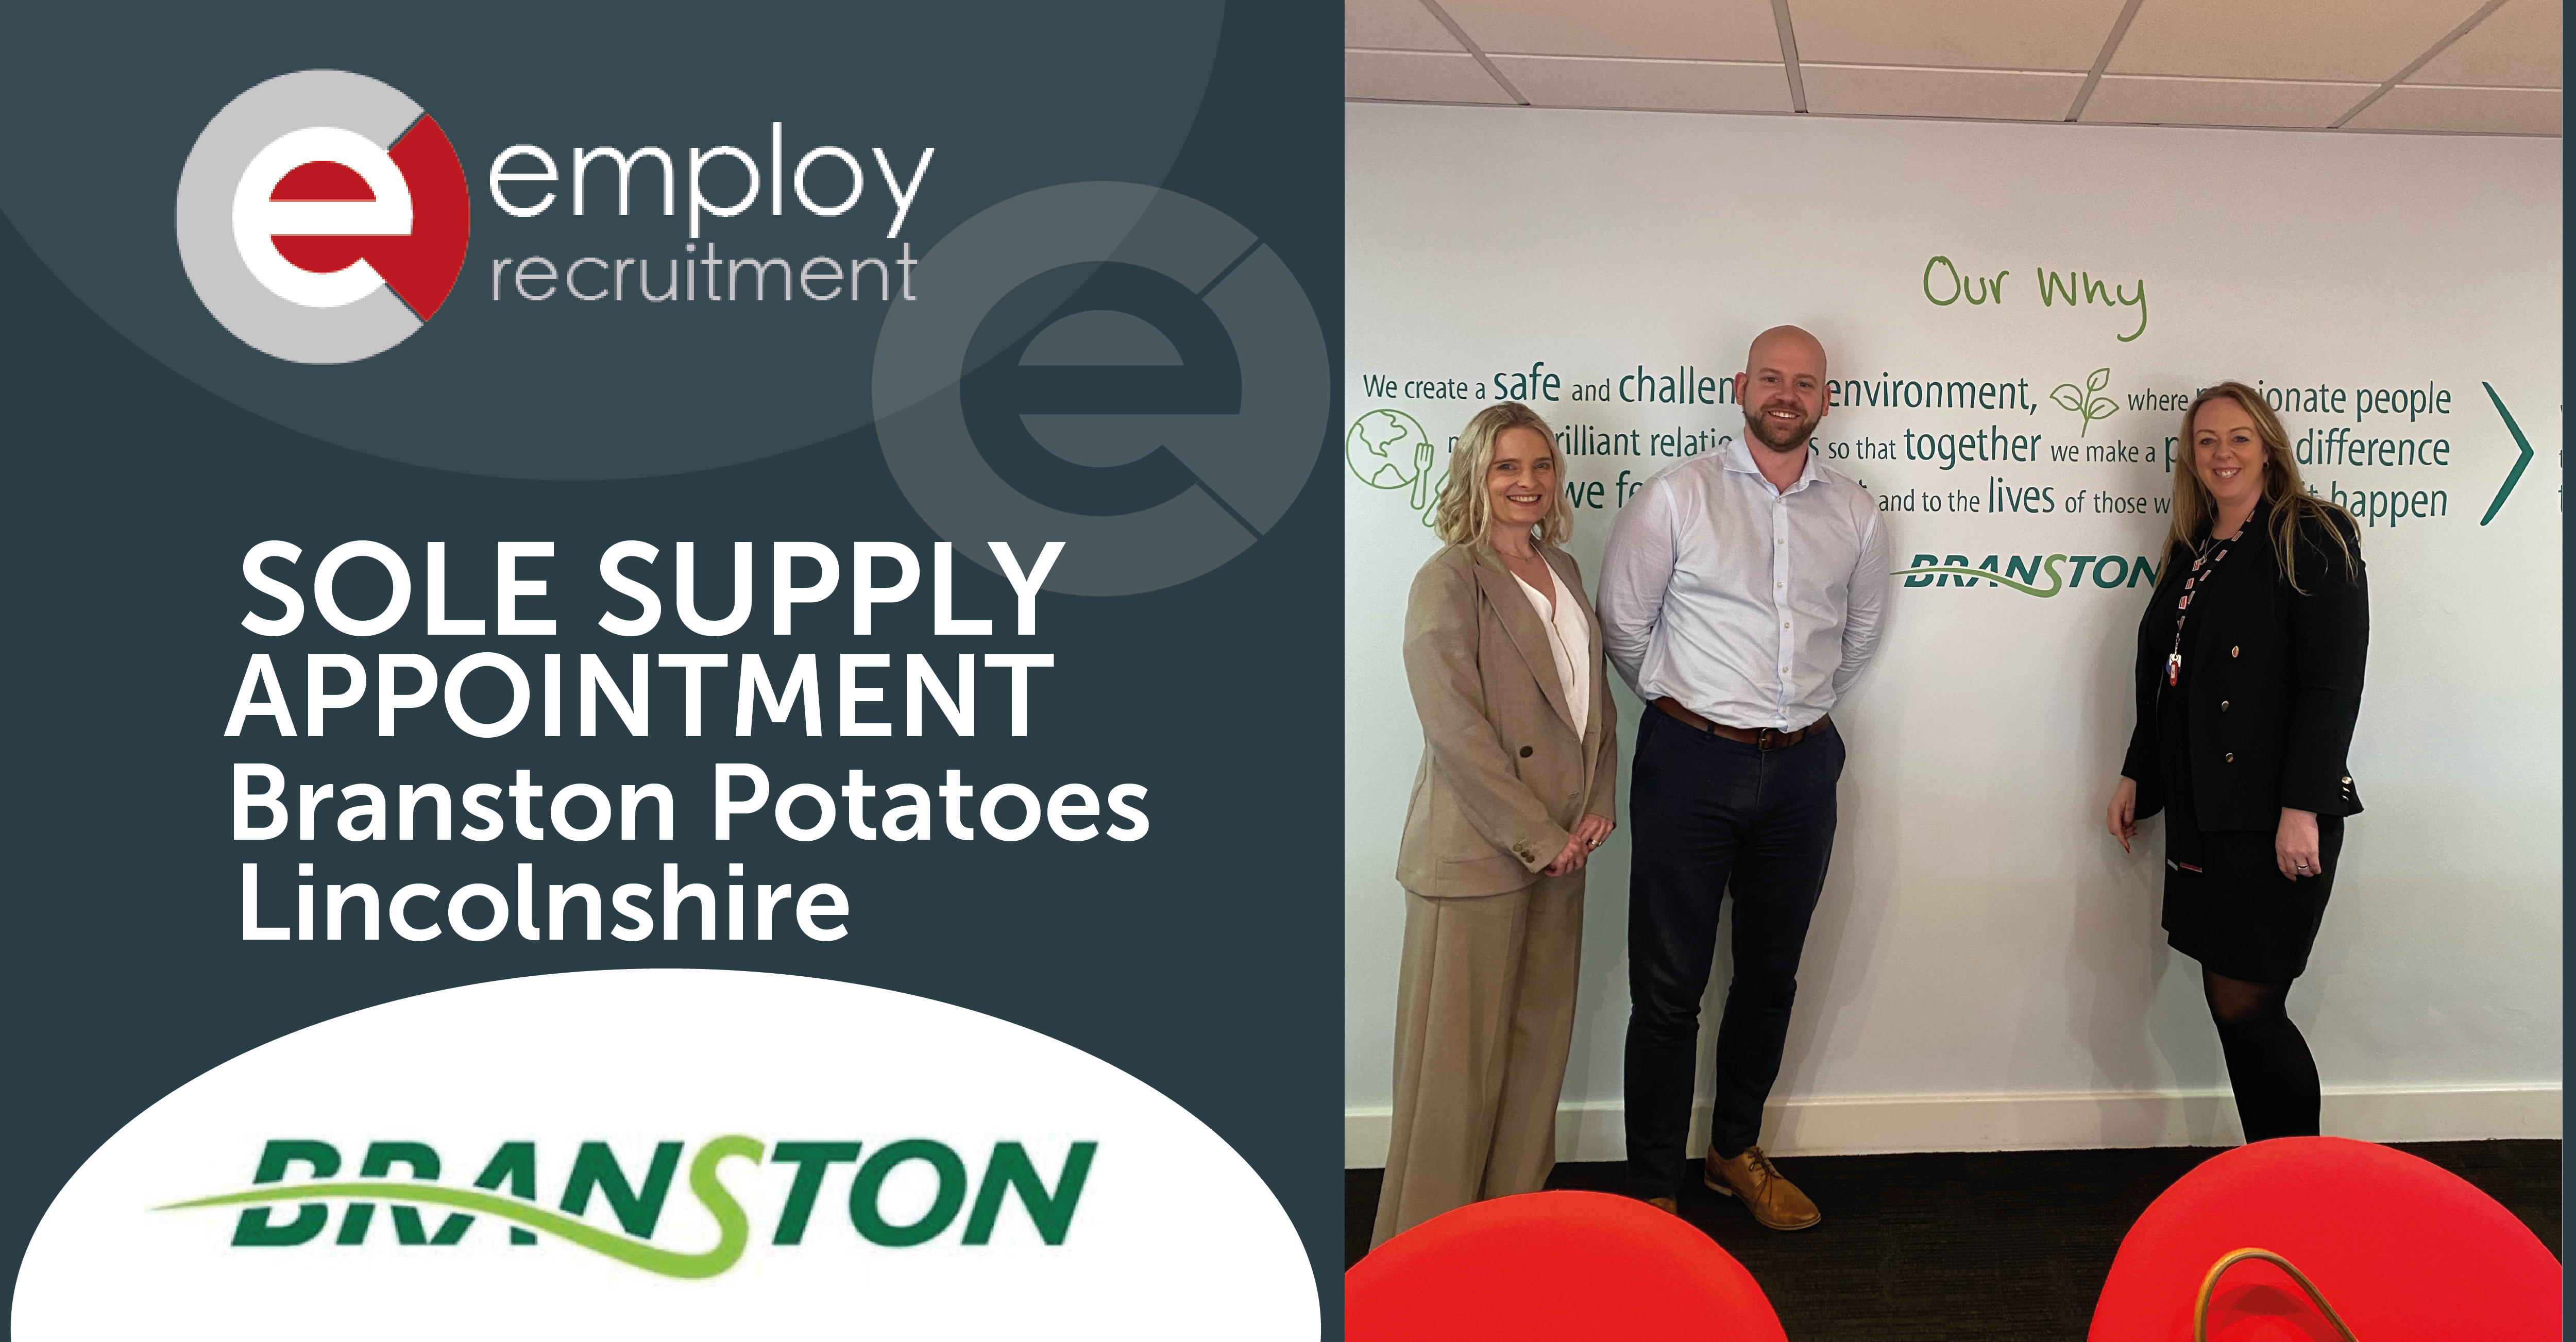 Branston Potatoes Sole Supplier Appointment